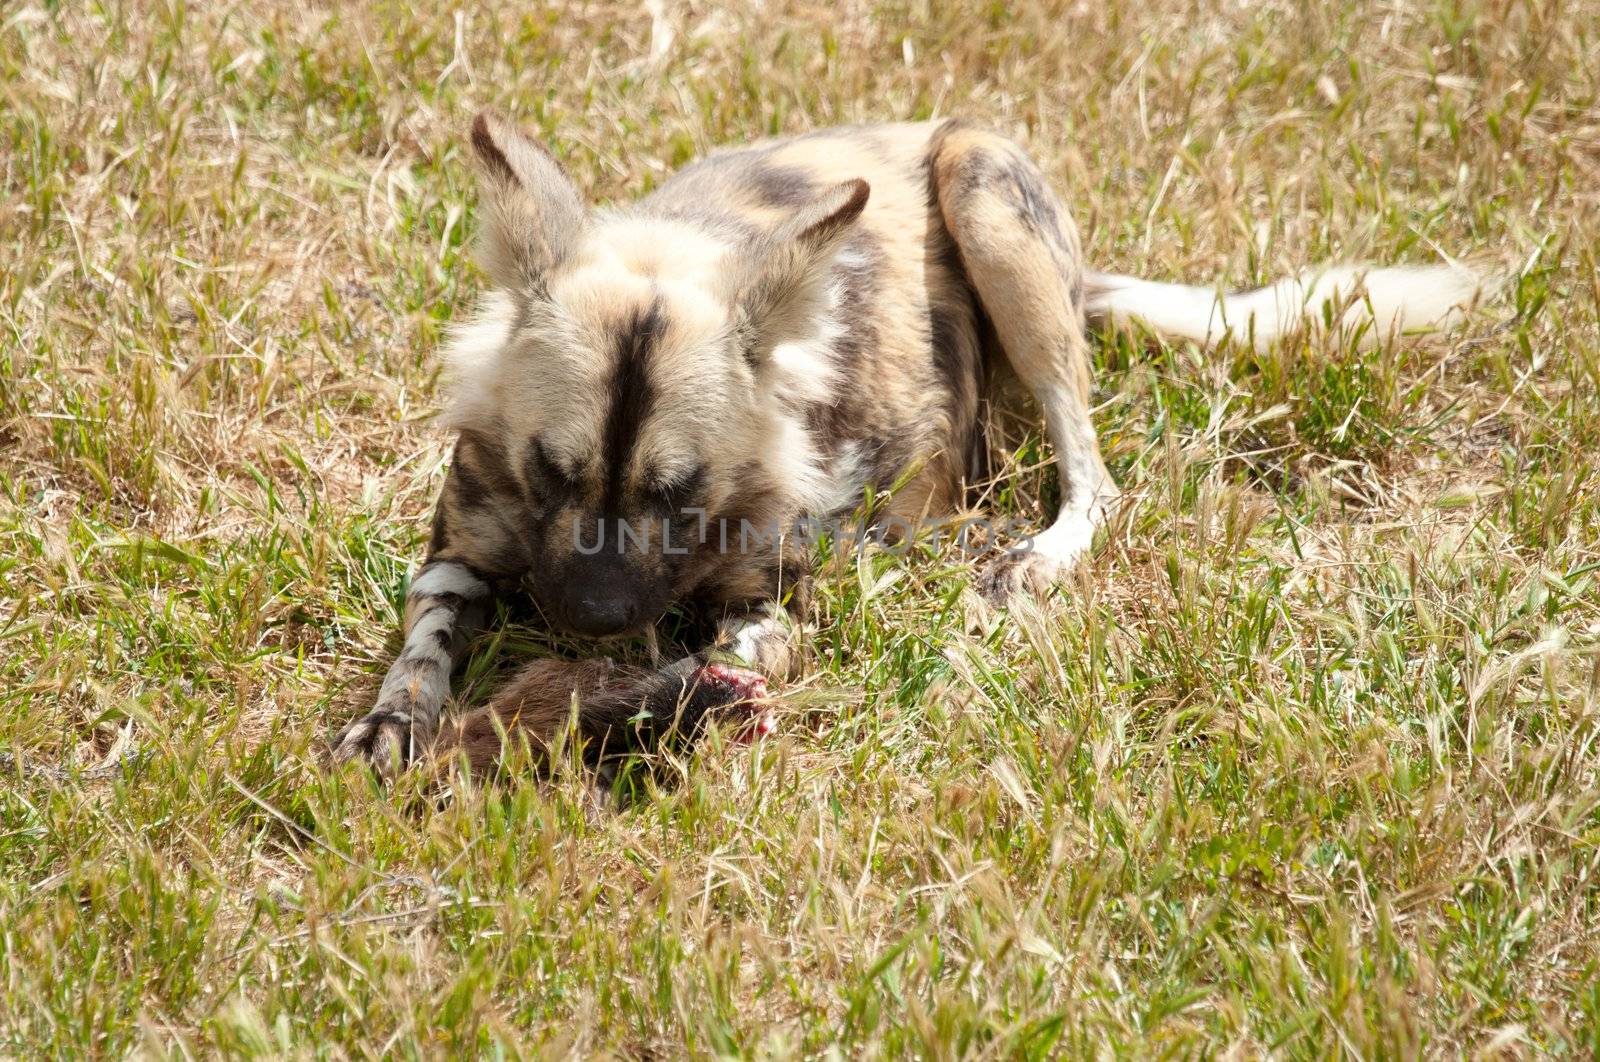 cape hunting dog eating meat by clearviewstock